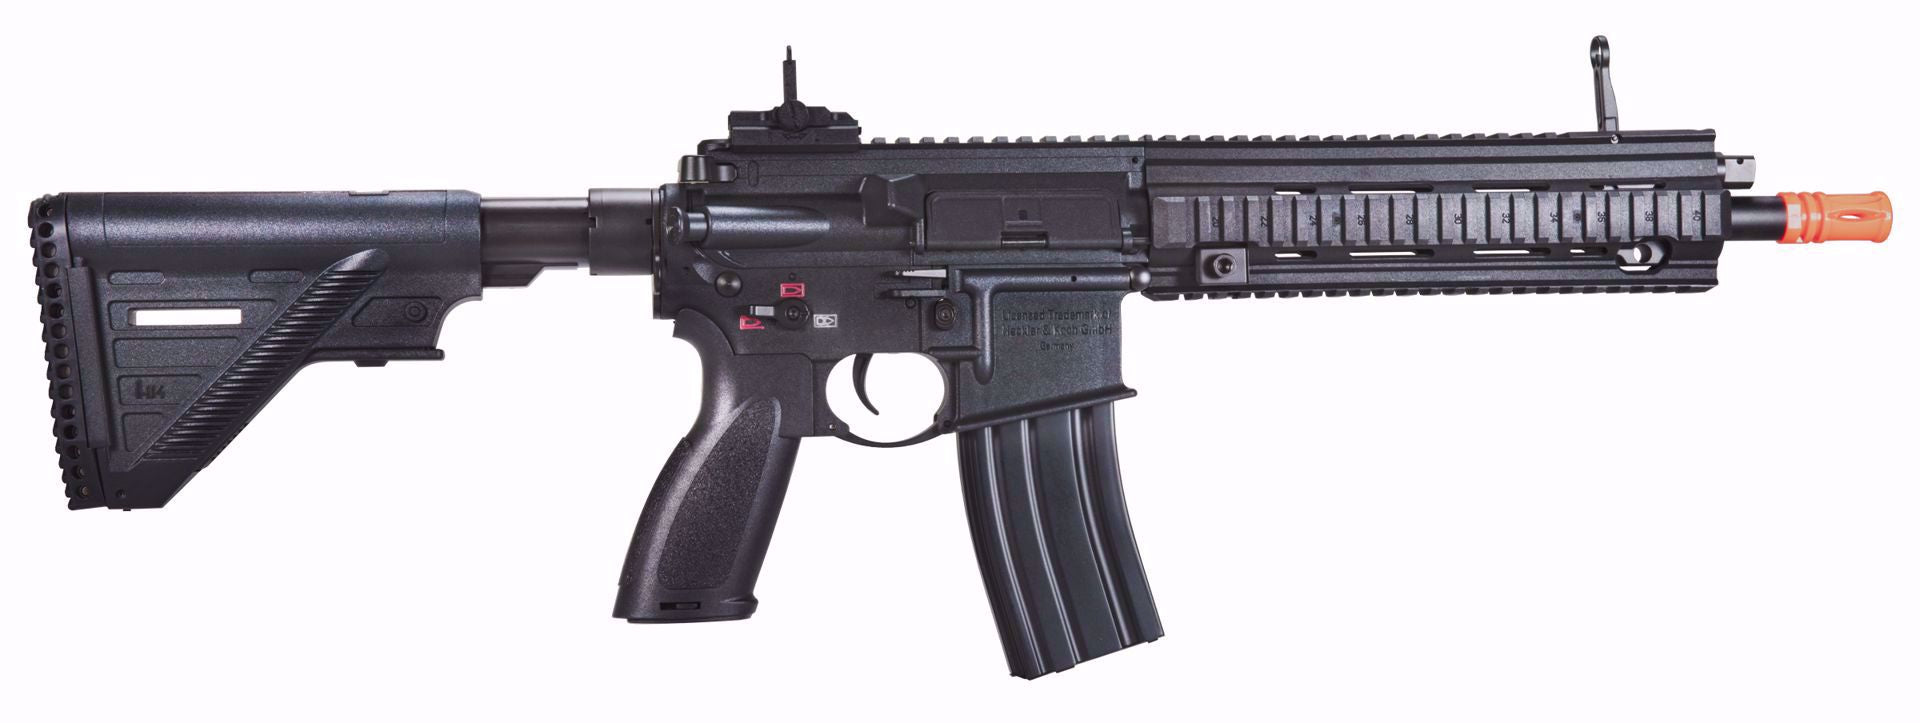 H&K HK416 Competition Airsoft AEG Rifle by Umarex Black - ssairsoft